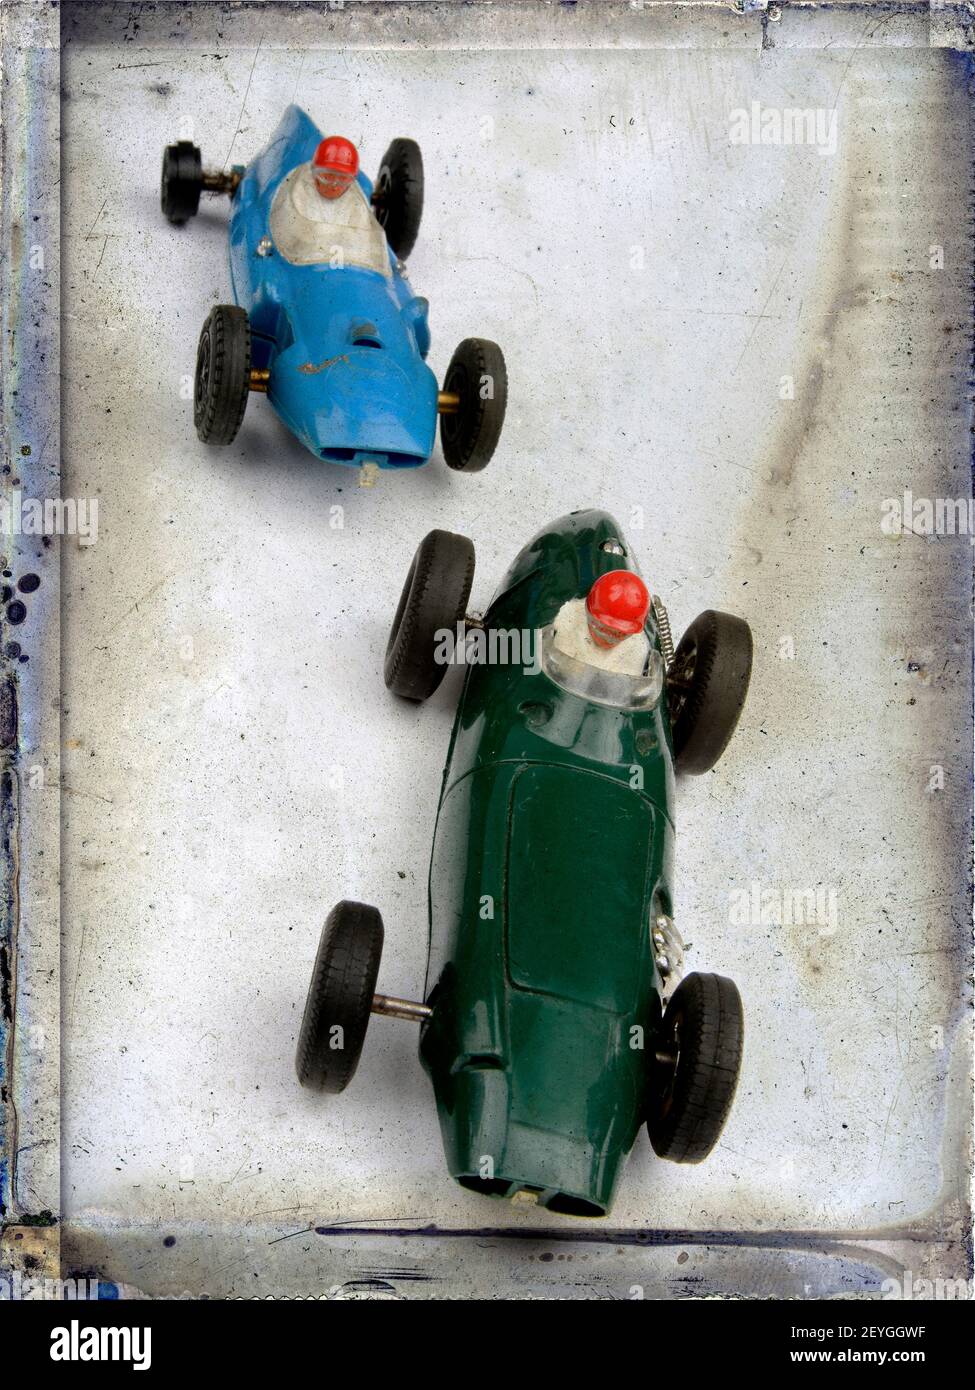 Toy race cars Stock Photo